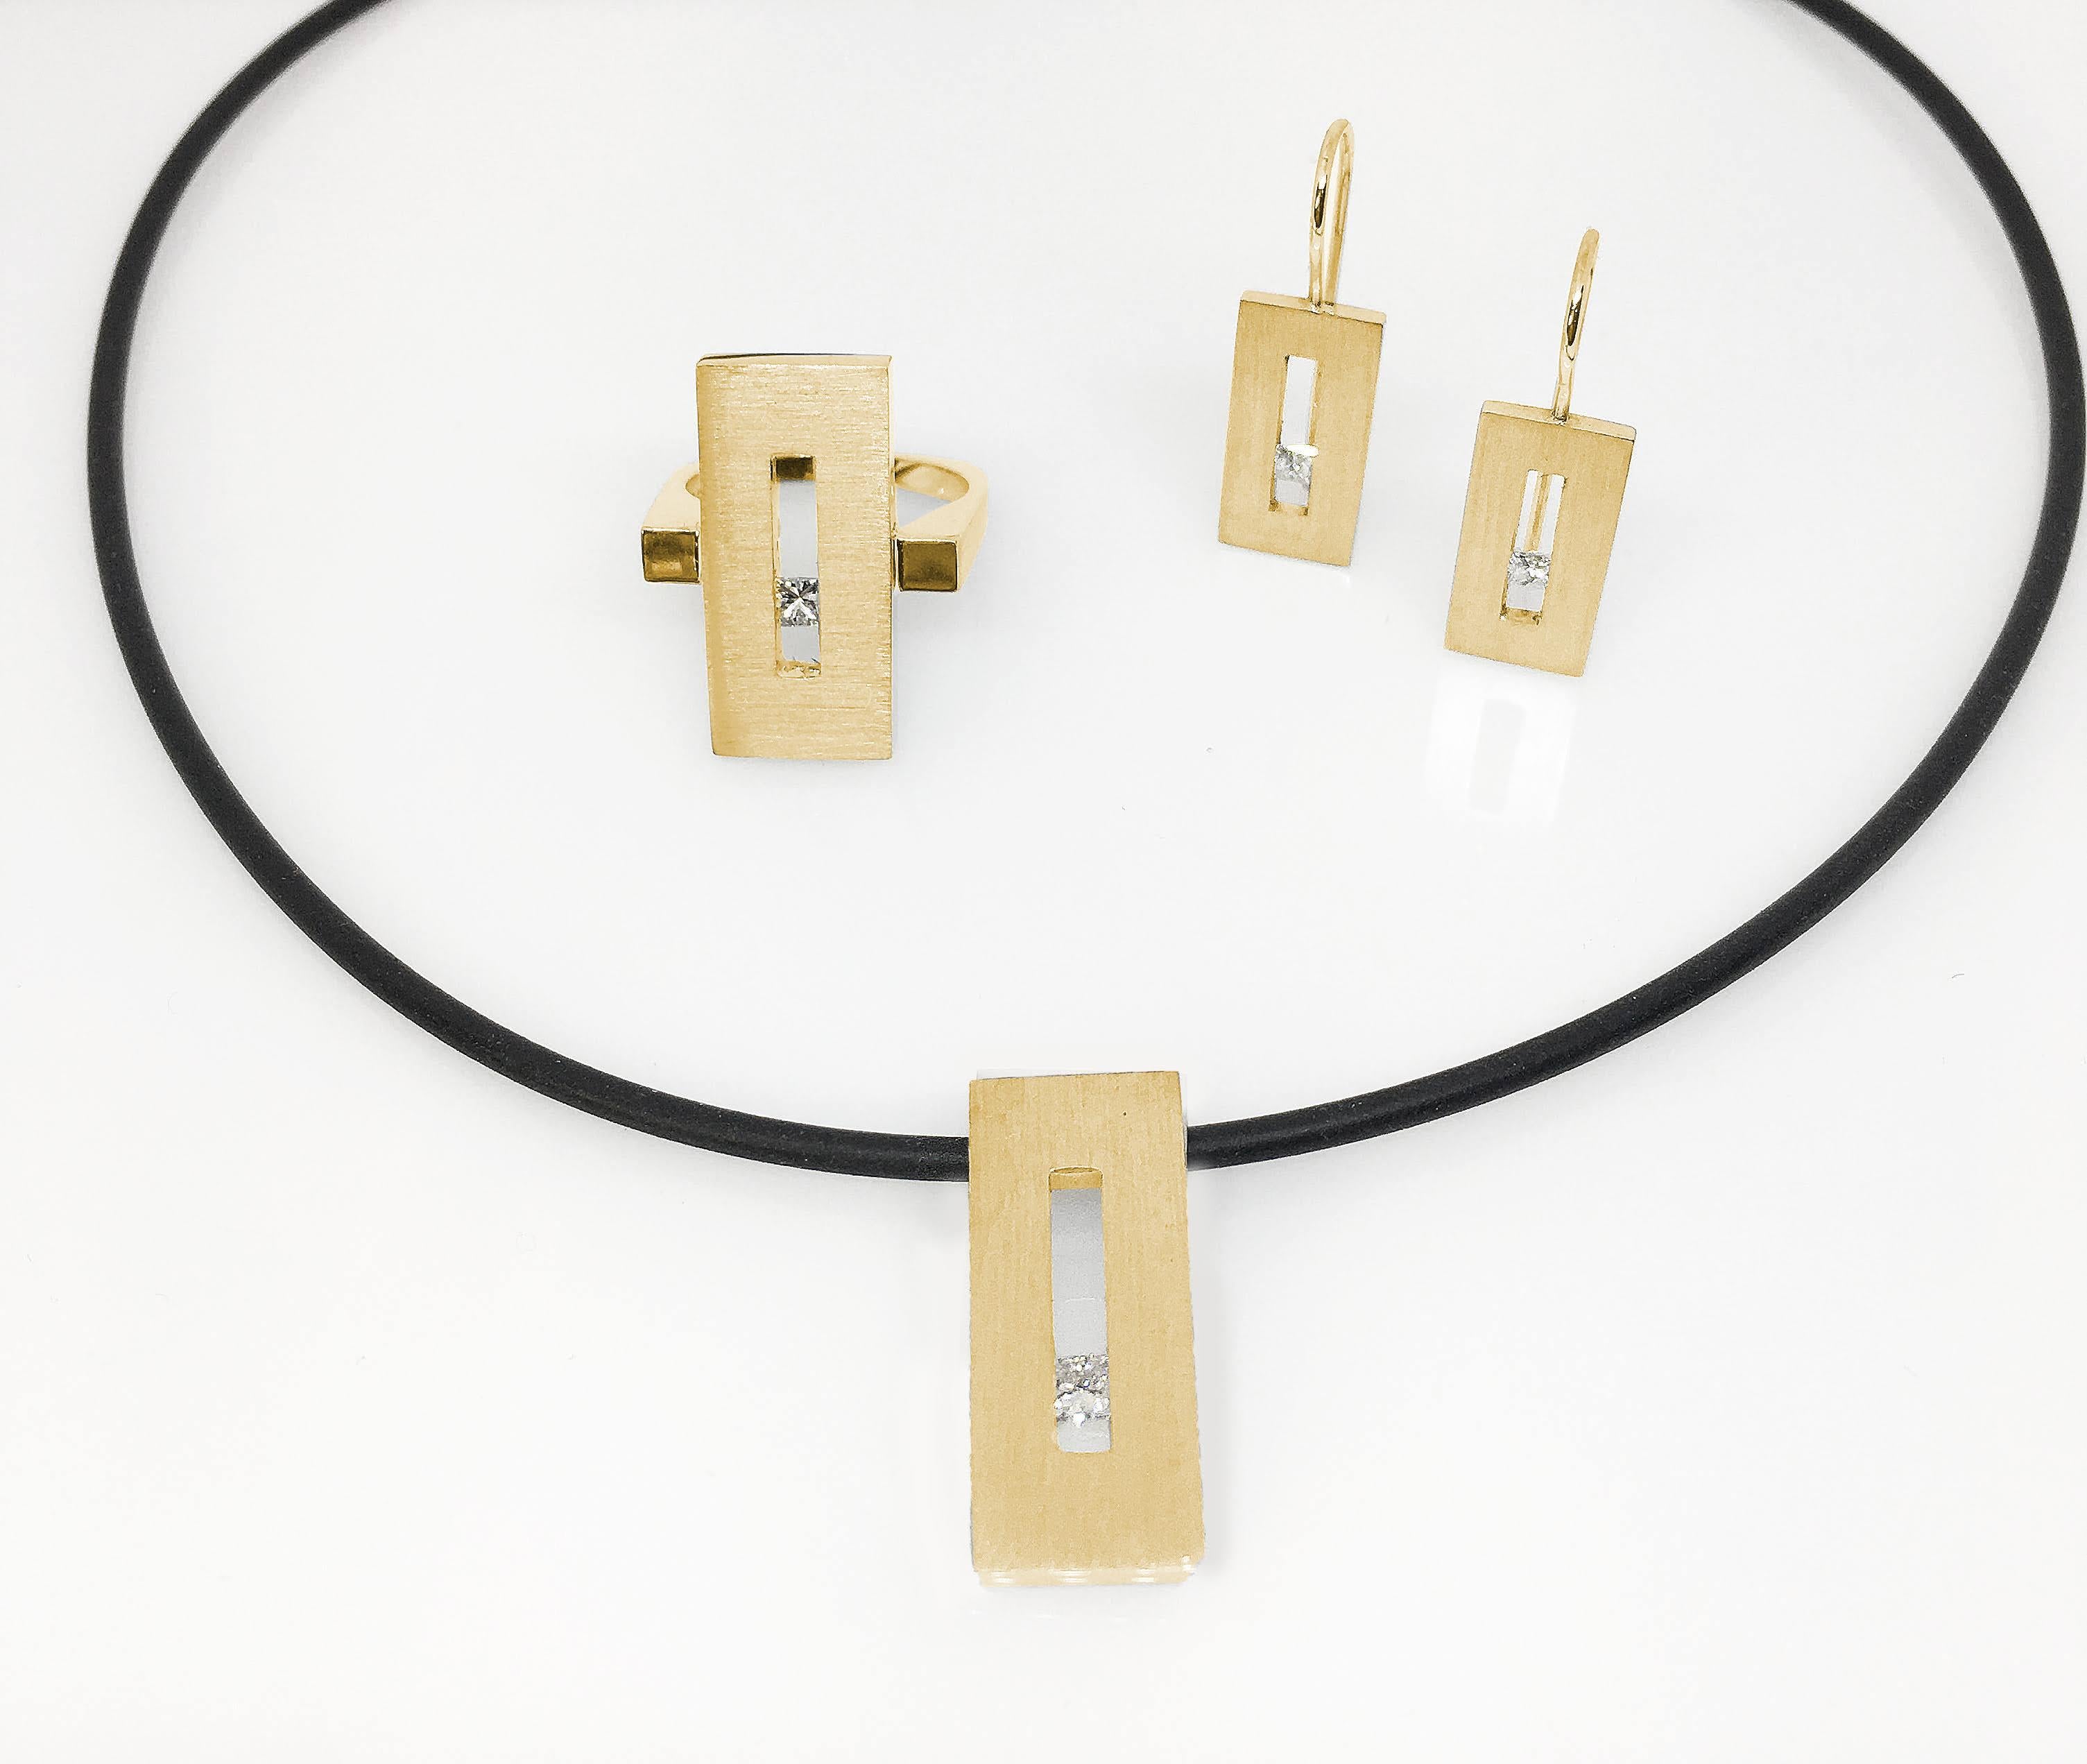 This Princess Diamond in Yellow Gold Suspended Rectangle Pendant on Rubber Cord is part of our Suspension Collection. Modern and architecturally inspired, this rectangle pendant is shown in yellow gold with a brushed finish and set off center with